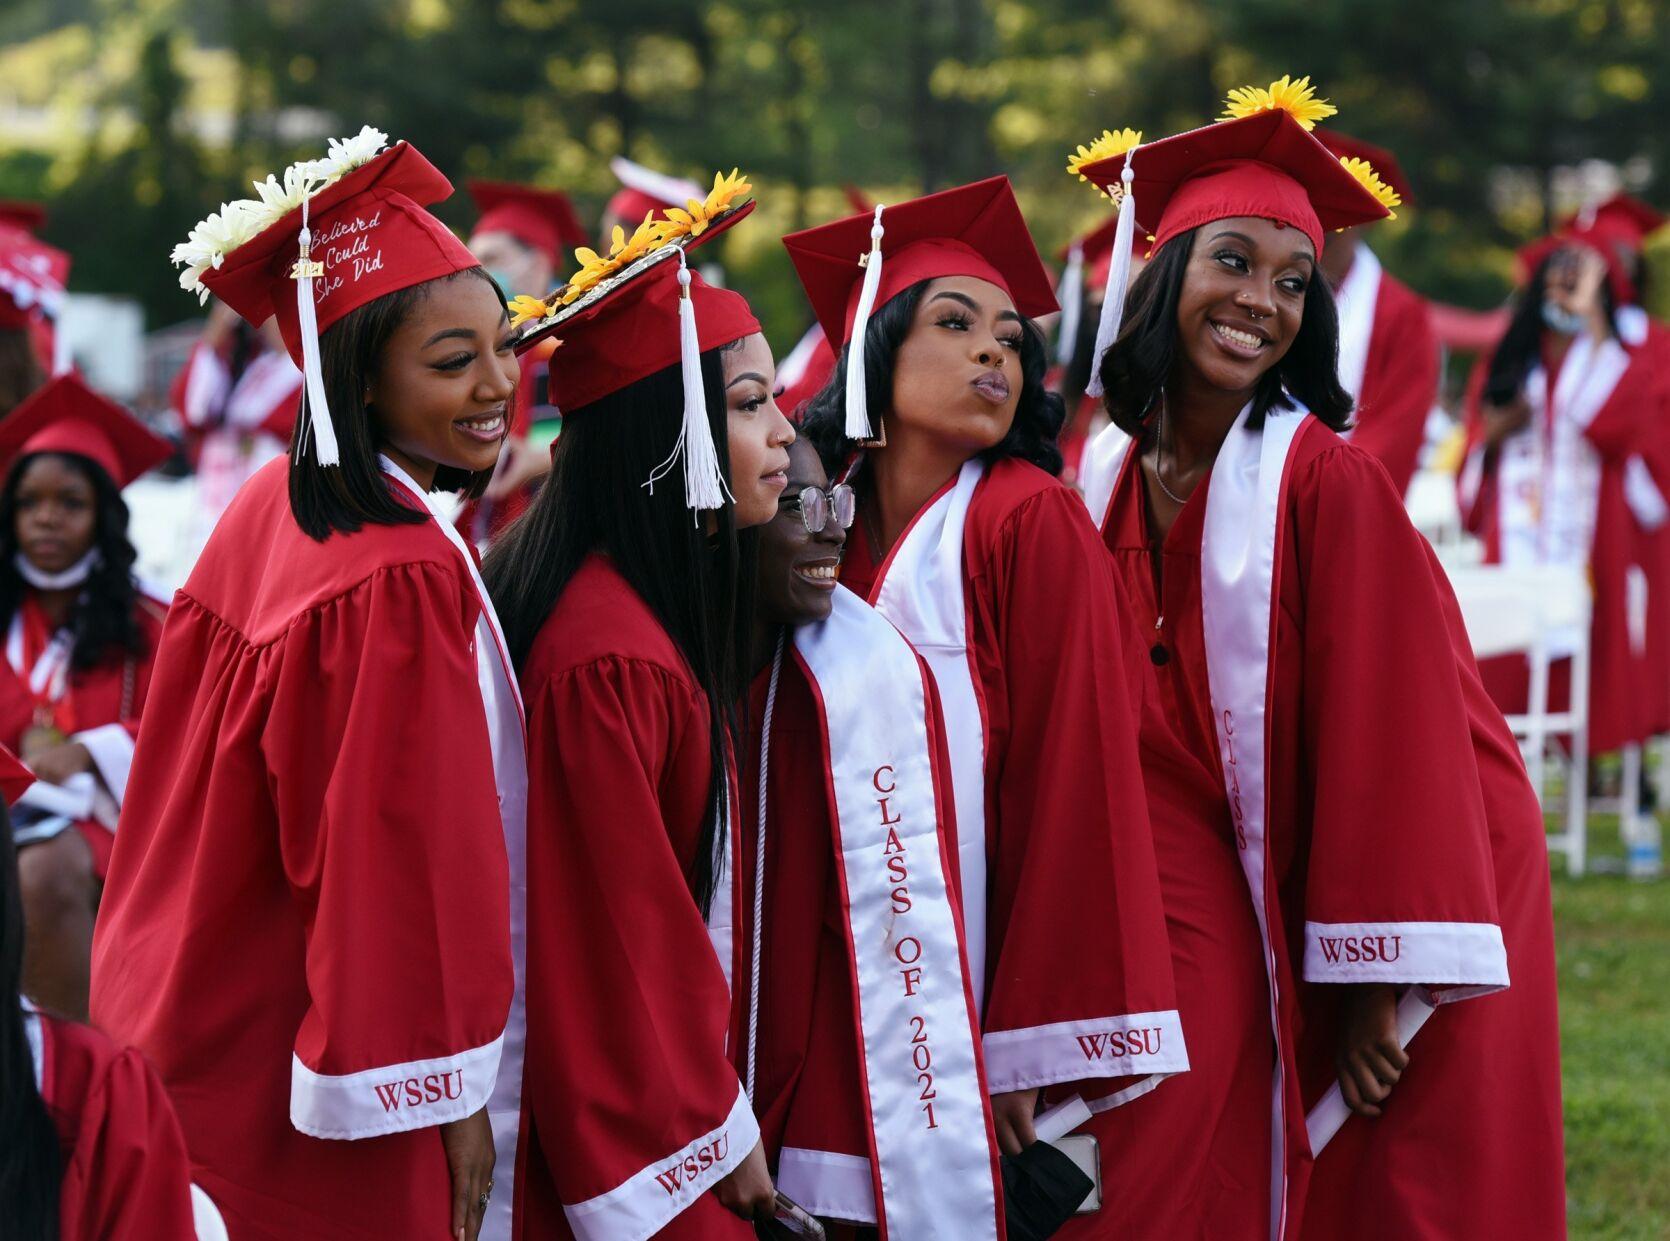 295 students in WSSU's School of Health Sciences received their degrees